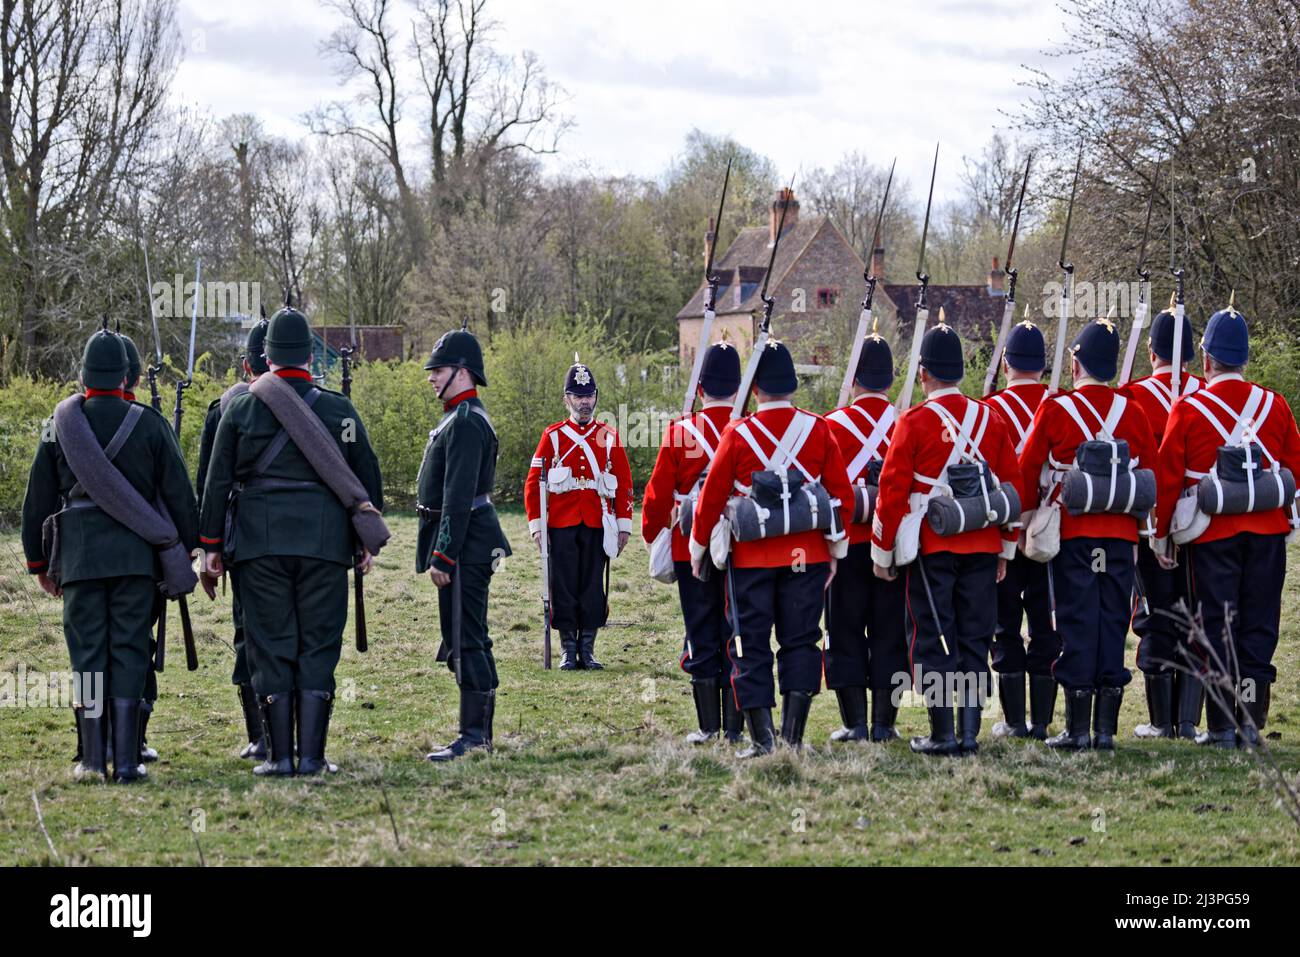 9th April 2022, Buckinghamshire, UK, re-enactors portray people of past events. Members of the Victorian Military Society form up as the 1st Battalion Middlesex known as the Diehards in red coats alongside the 13th Surrey Rifles who are Victorian rifle volunteers. Stock Photo